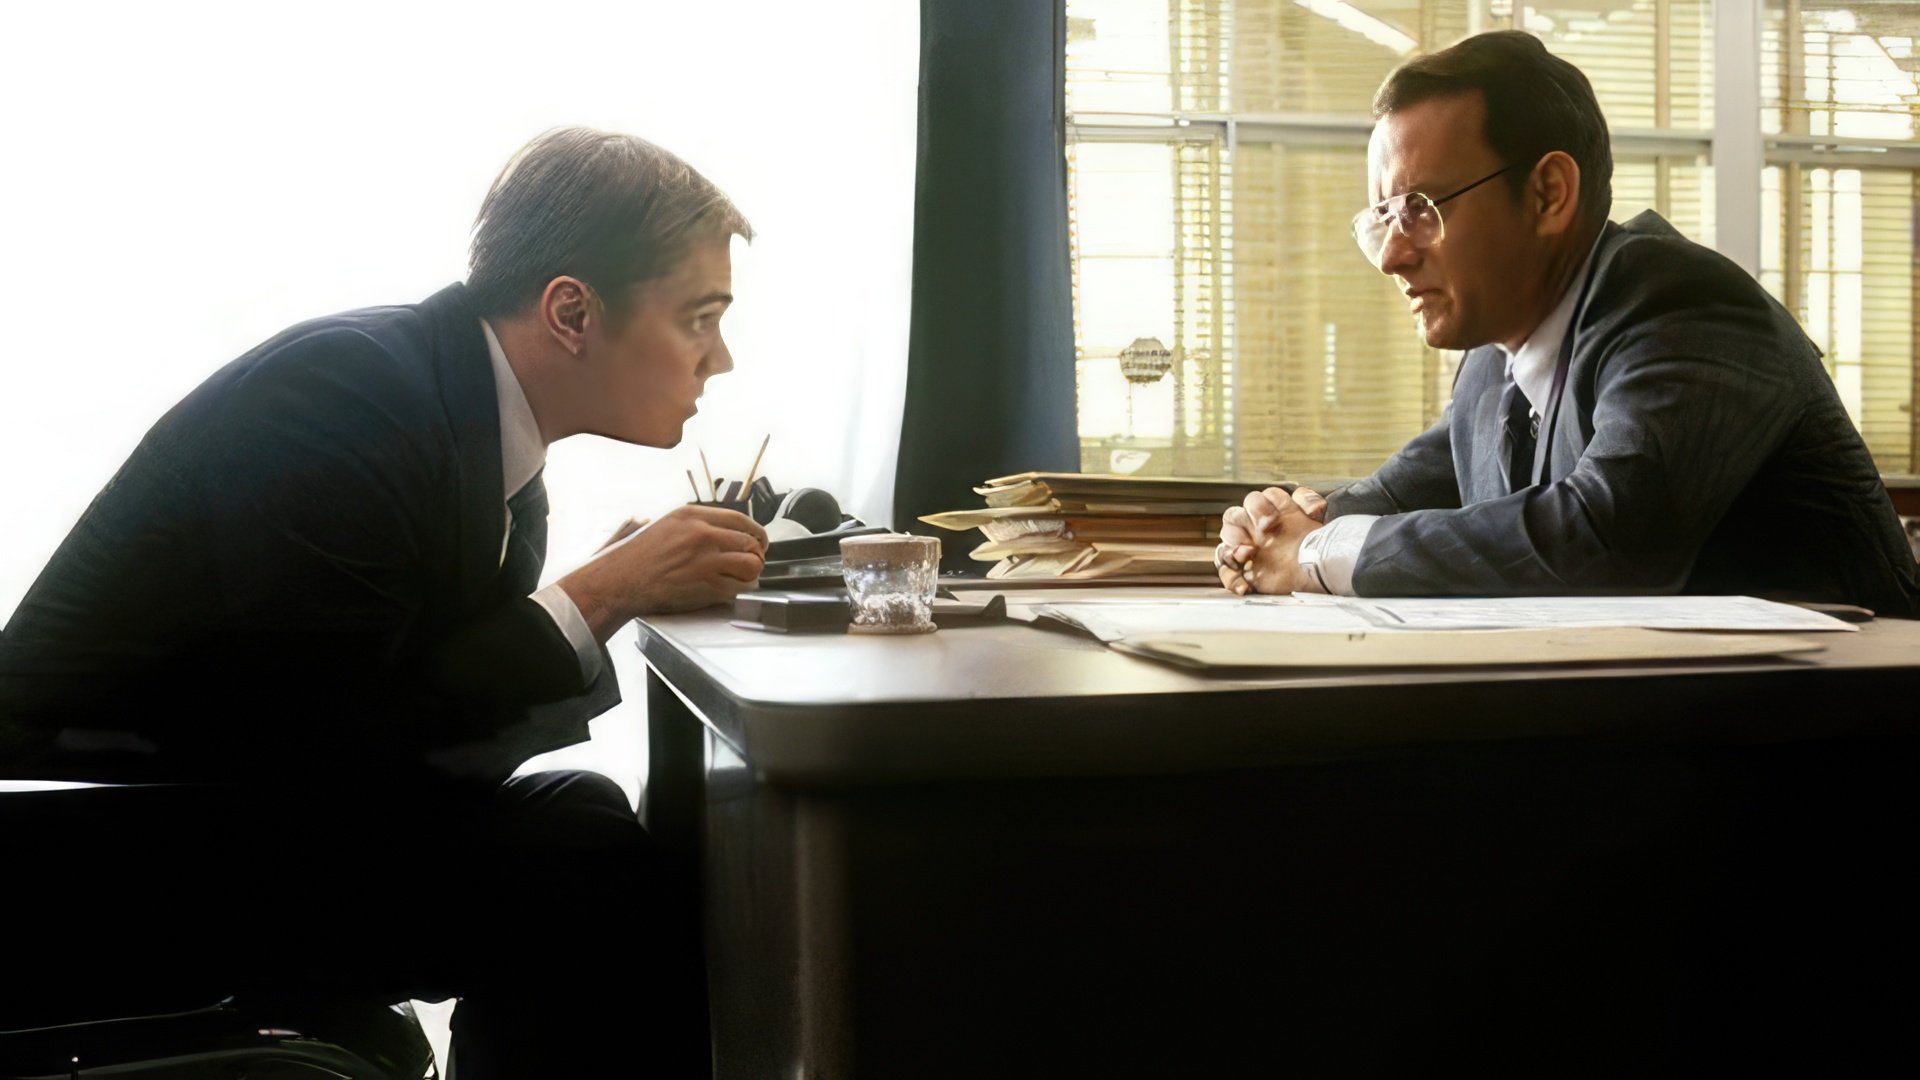 Leonardo DiCaprio with Tom Hanks in 'Catch Me If You Can'